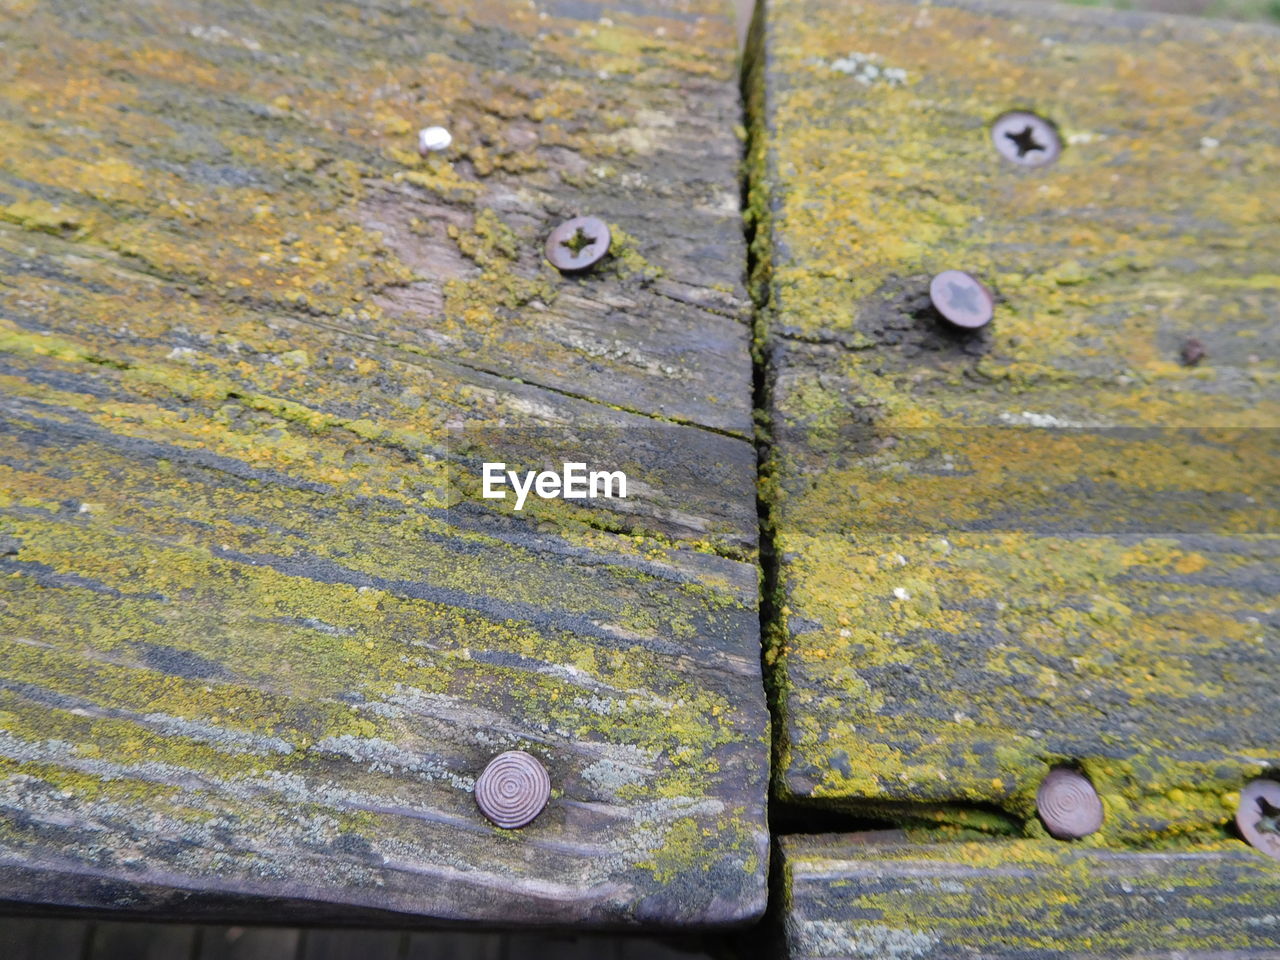 FULL FRAME SHOT OF RUSTY METAL WITH WOOD